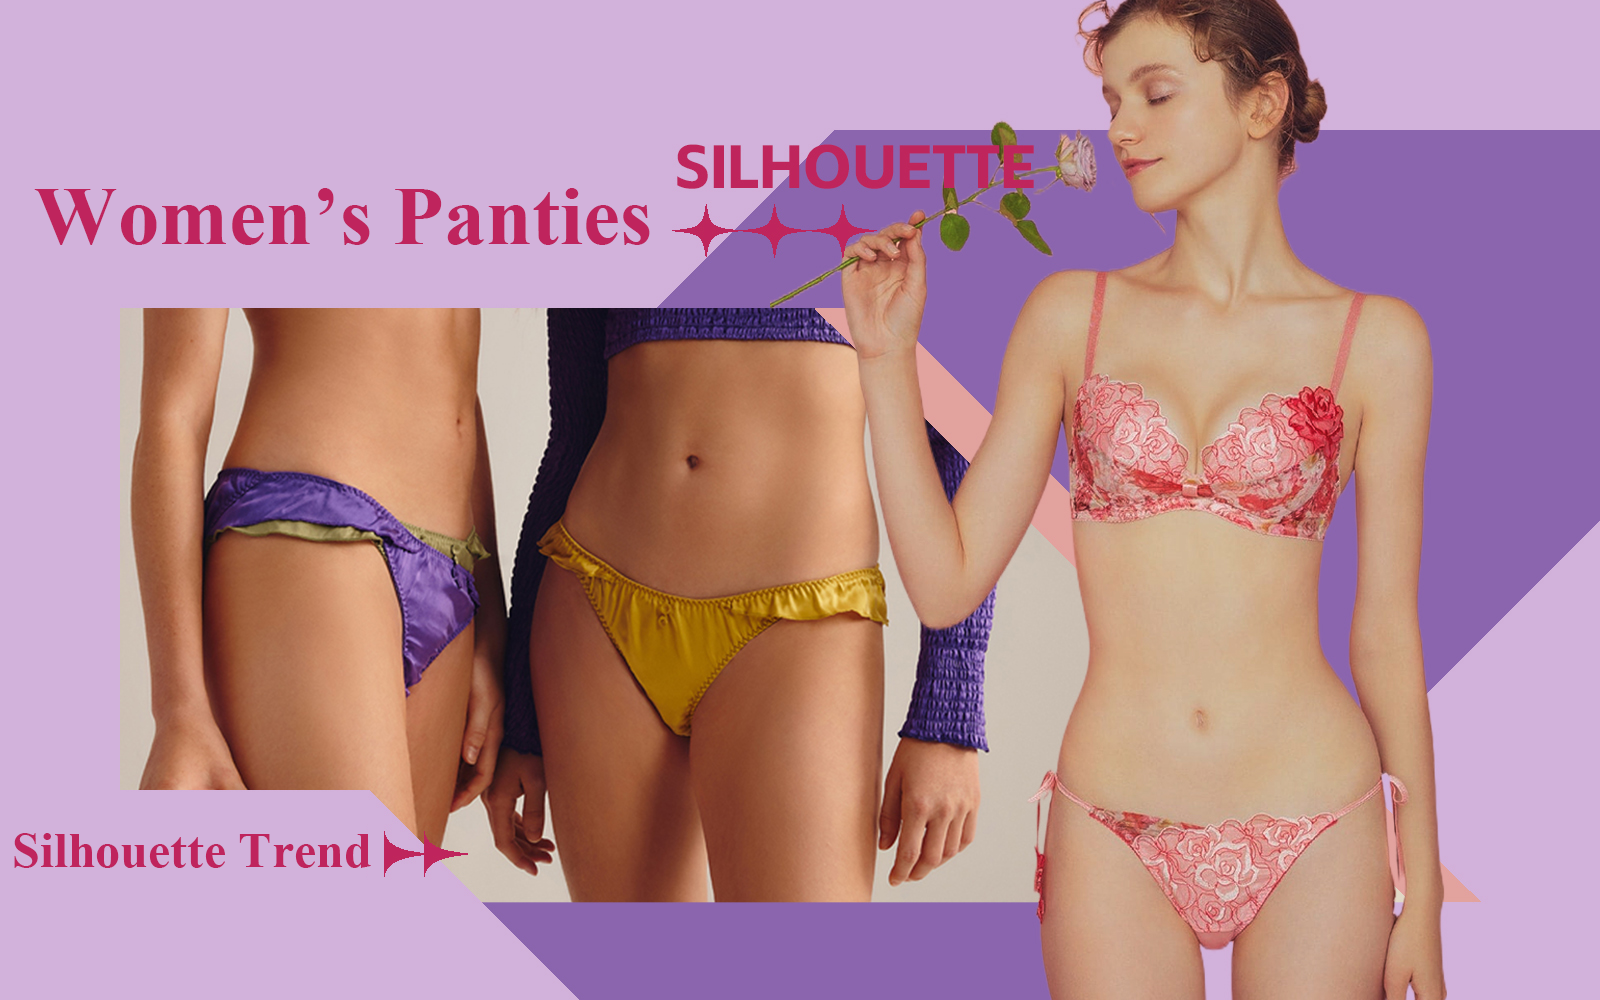 The Silhouette Trend for Women's Panties